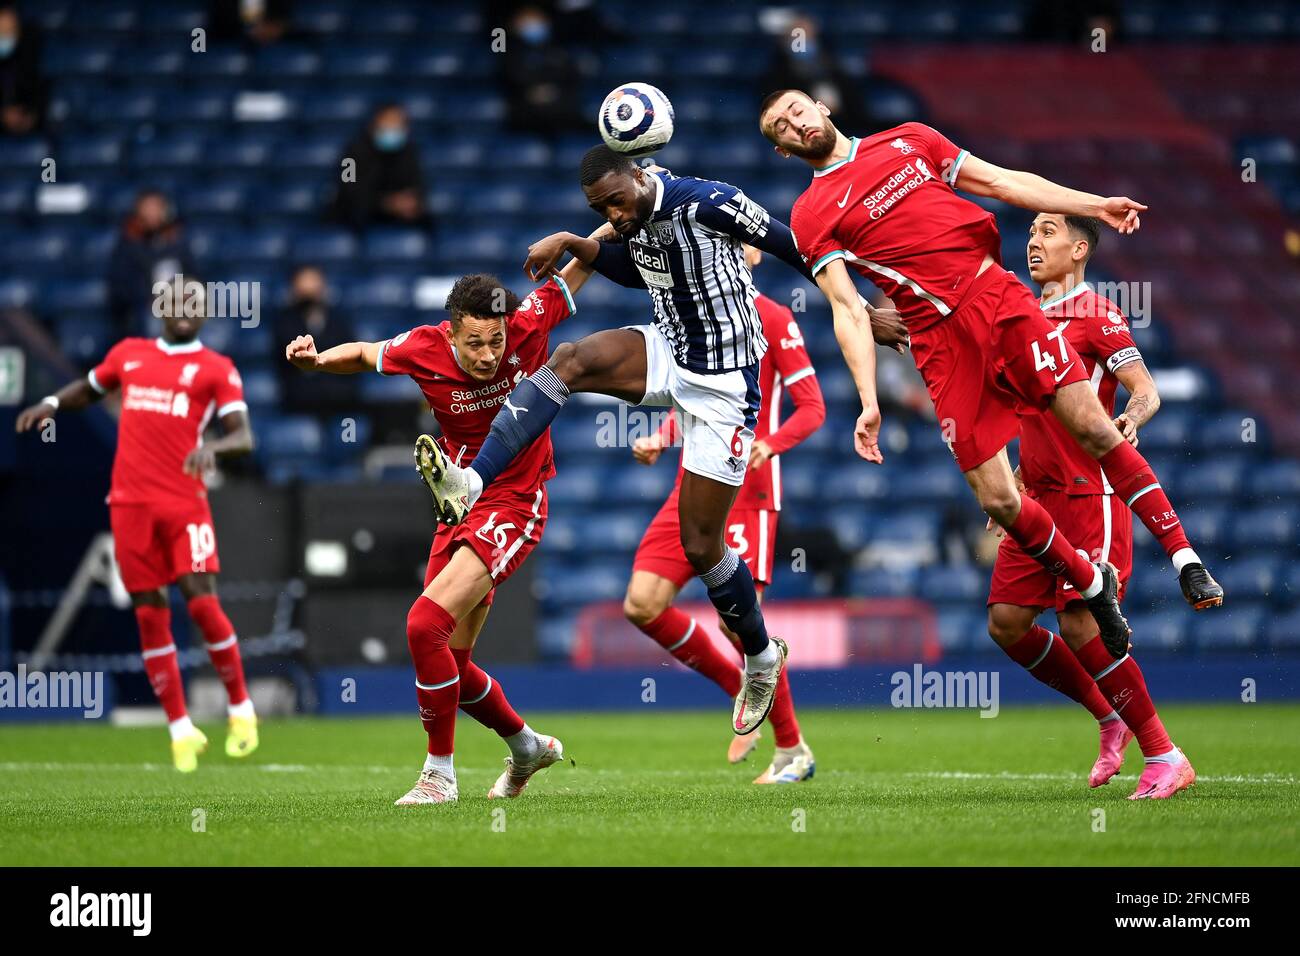 West Bromwich Albion's Semi Ajayi (centre) battles for the ball with Liverpool's Rhys Williams and Nathaniel Phillips (right) during the Premier League match at The Hawthorns, West Bromwich. Picture date: Sunday May 16, 2021. Stock Photo